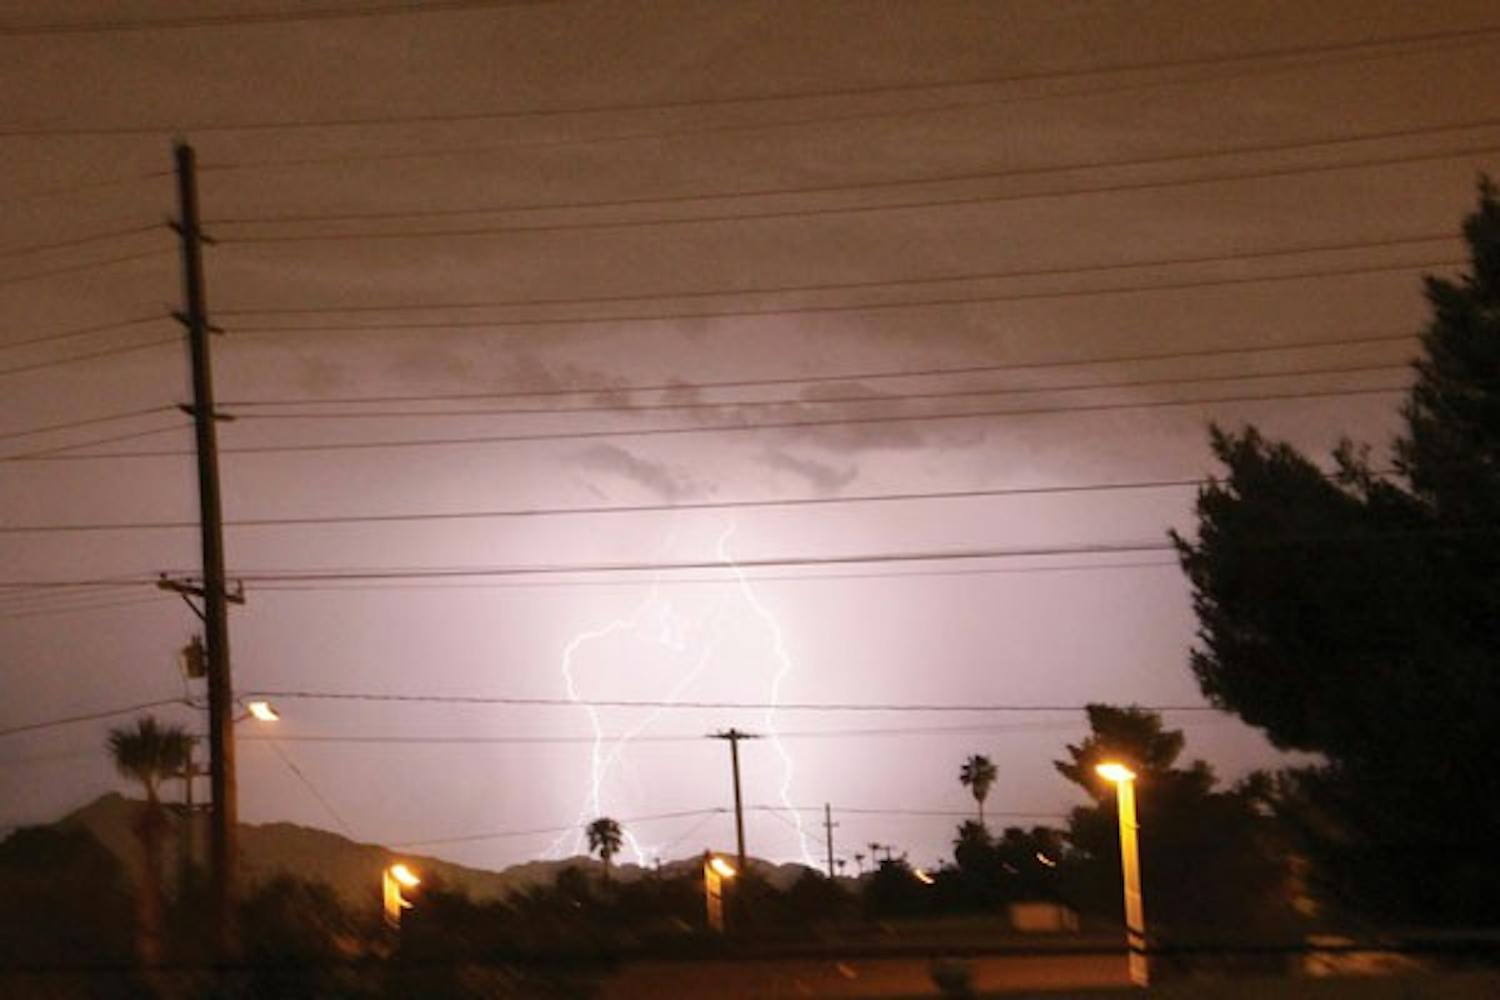 Lightning strikes in the north Valley during Wednesday evening's thunder storm. (Photo by Shawn Raymundo)